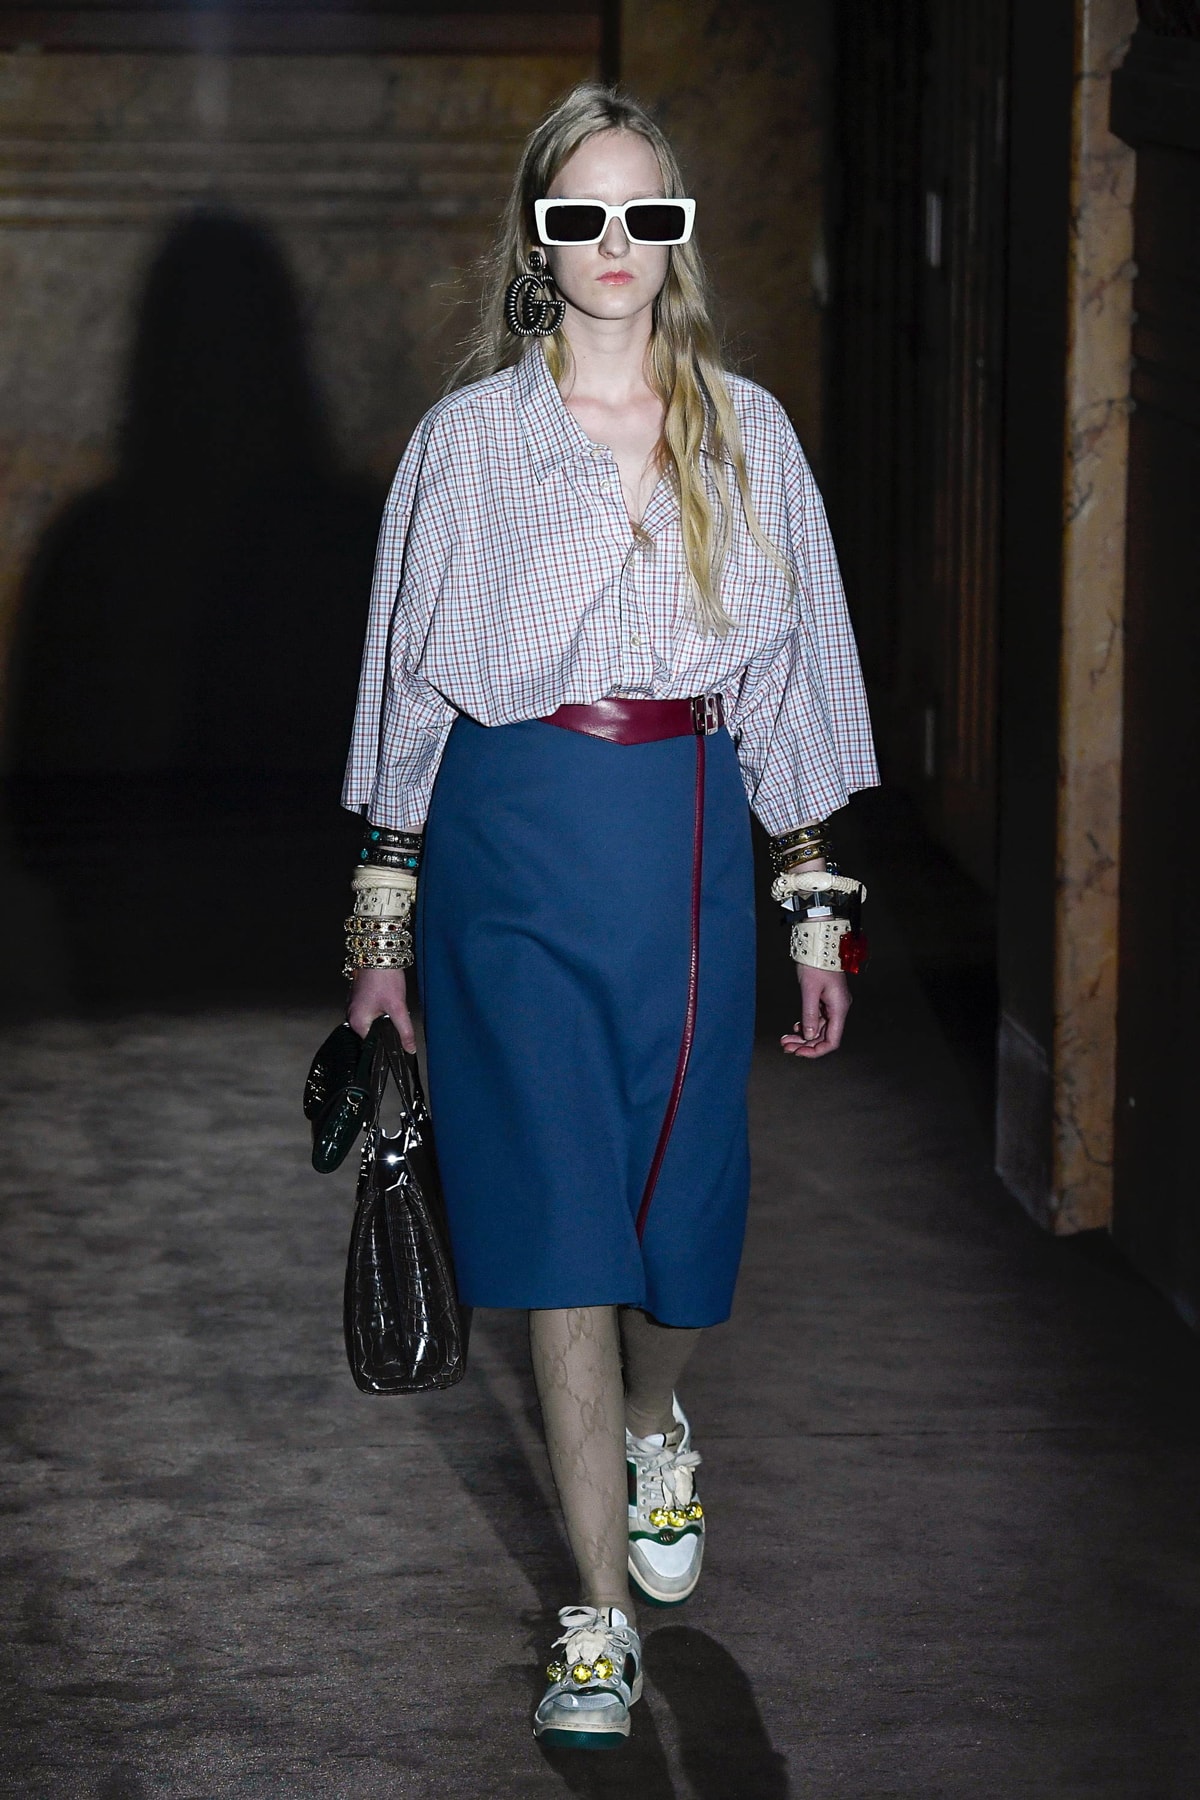 Gucci Alessandro Michelle Spring Summer 2019 Paris Fashion Week Show Collection Top White Skirt Navy